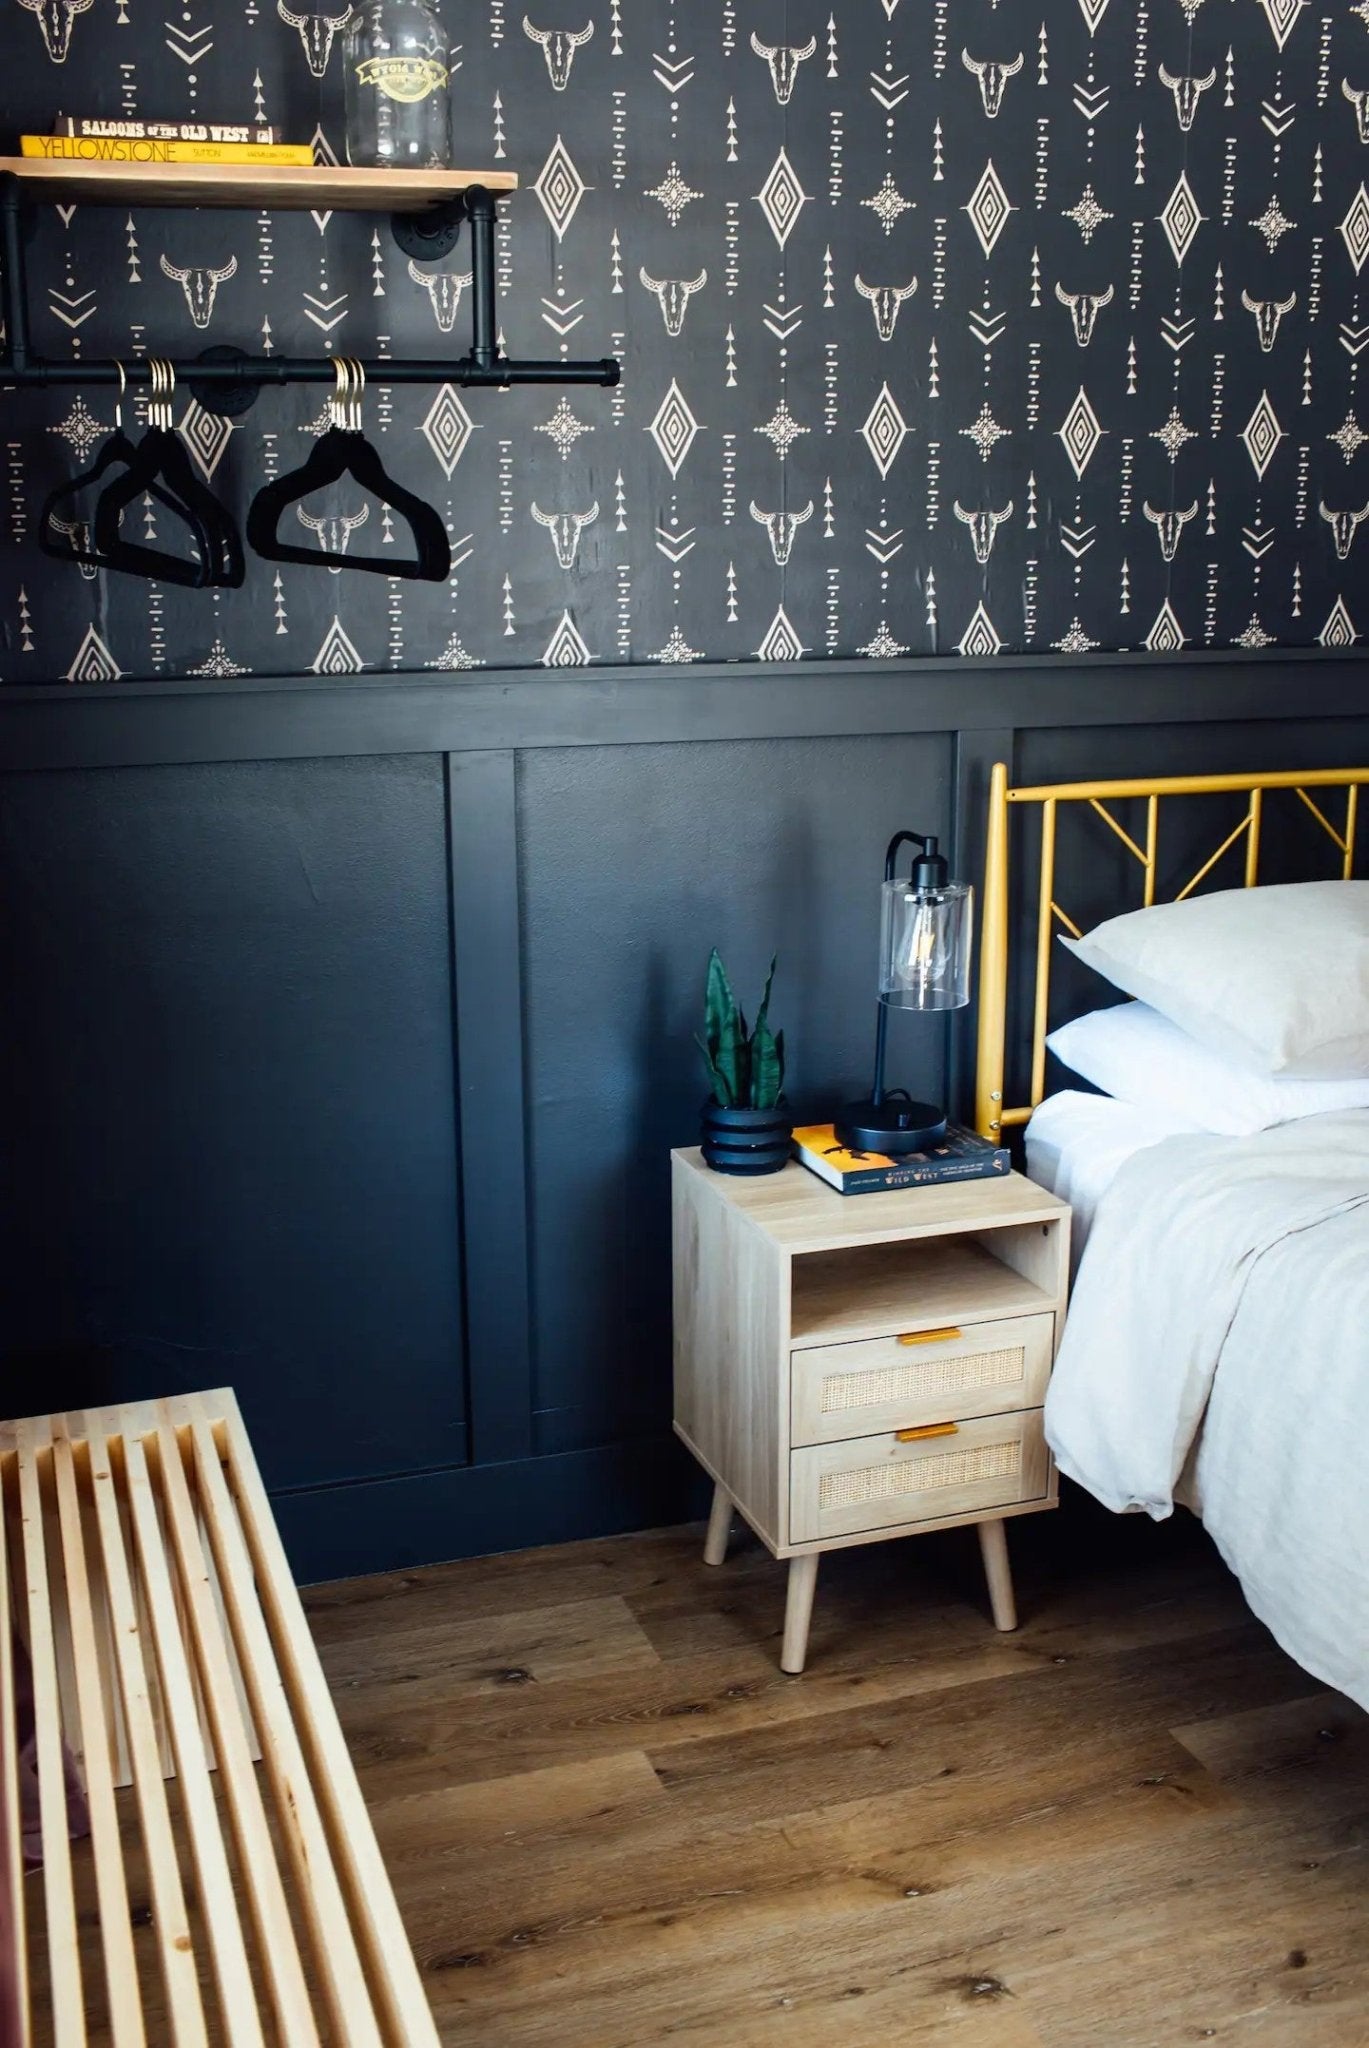  Another angle of the bedroom highlighting the Western-inspired wallpaper complemented by a dark blue paneled wall below. Beside the bed with crisp white linens is a natural wood bedside table with rattan drawer fronts, topped with a modern lantern-style lamp, books, and a small potted plant.